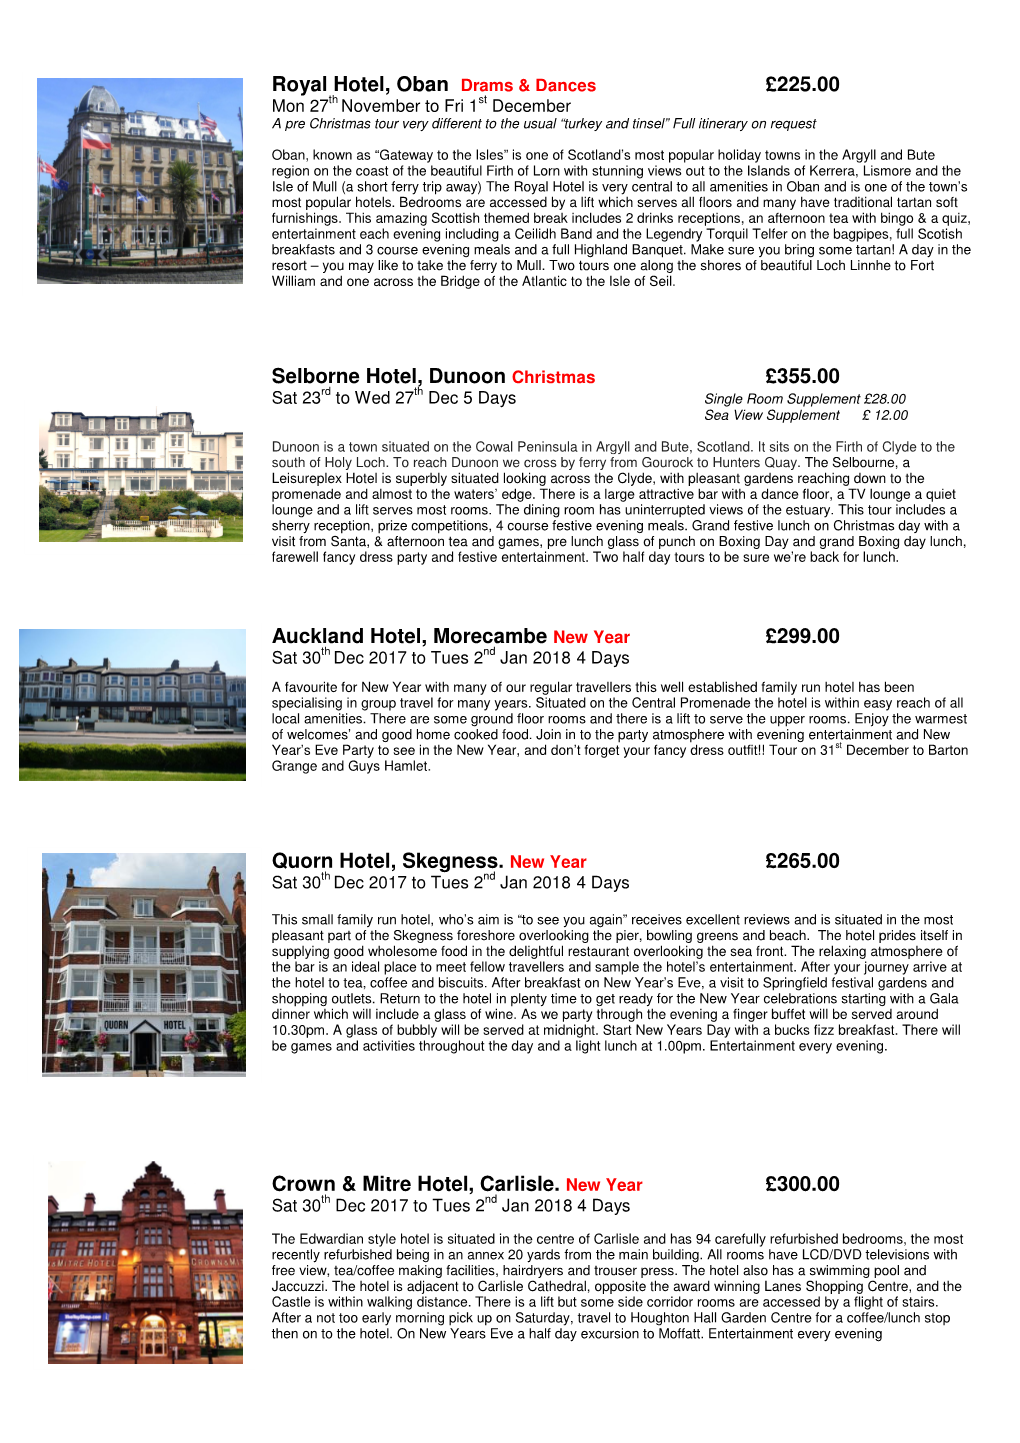 Royal Hotel, Oban Drams & Dances £225.00 Selborne Hotel, Dunoon Christmas £355.00 Auckland Hotel, Morecambe New Year